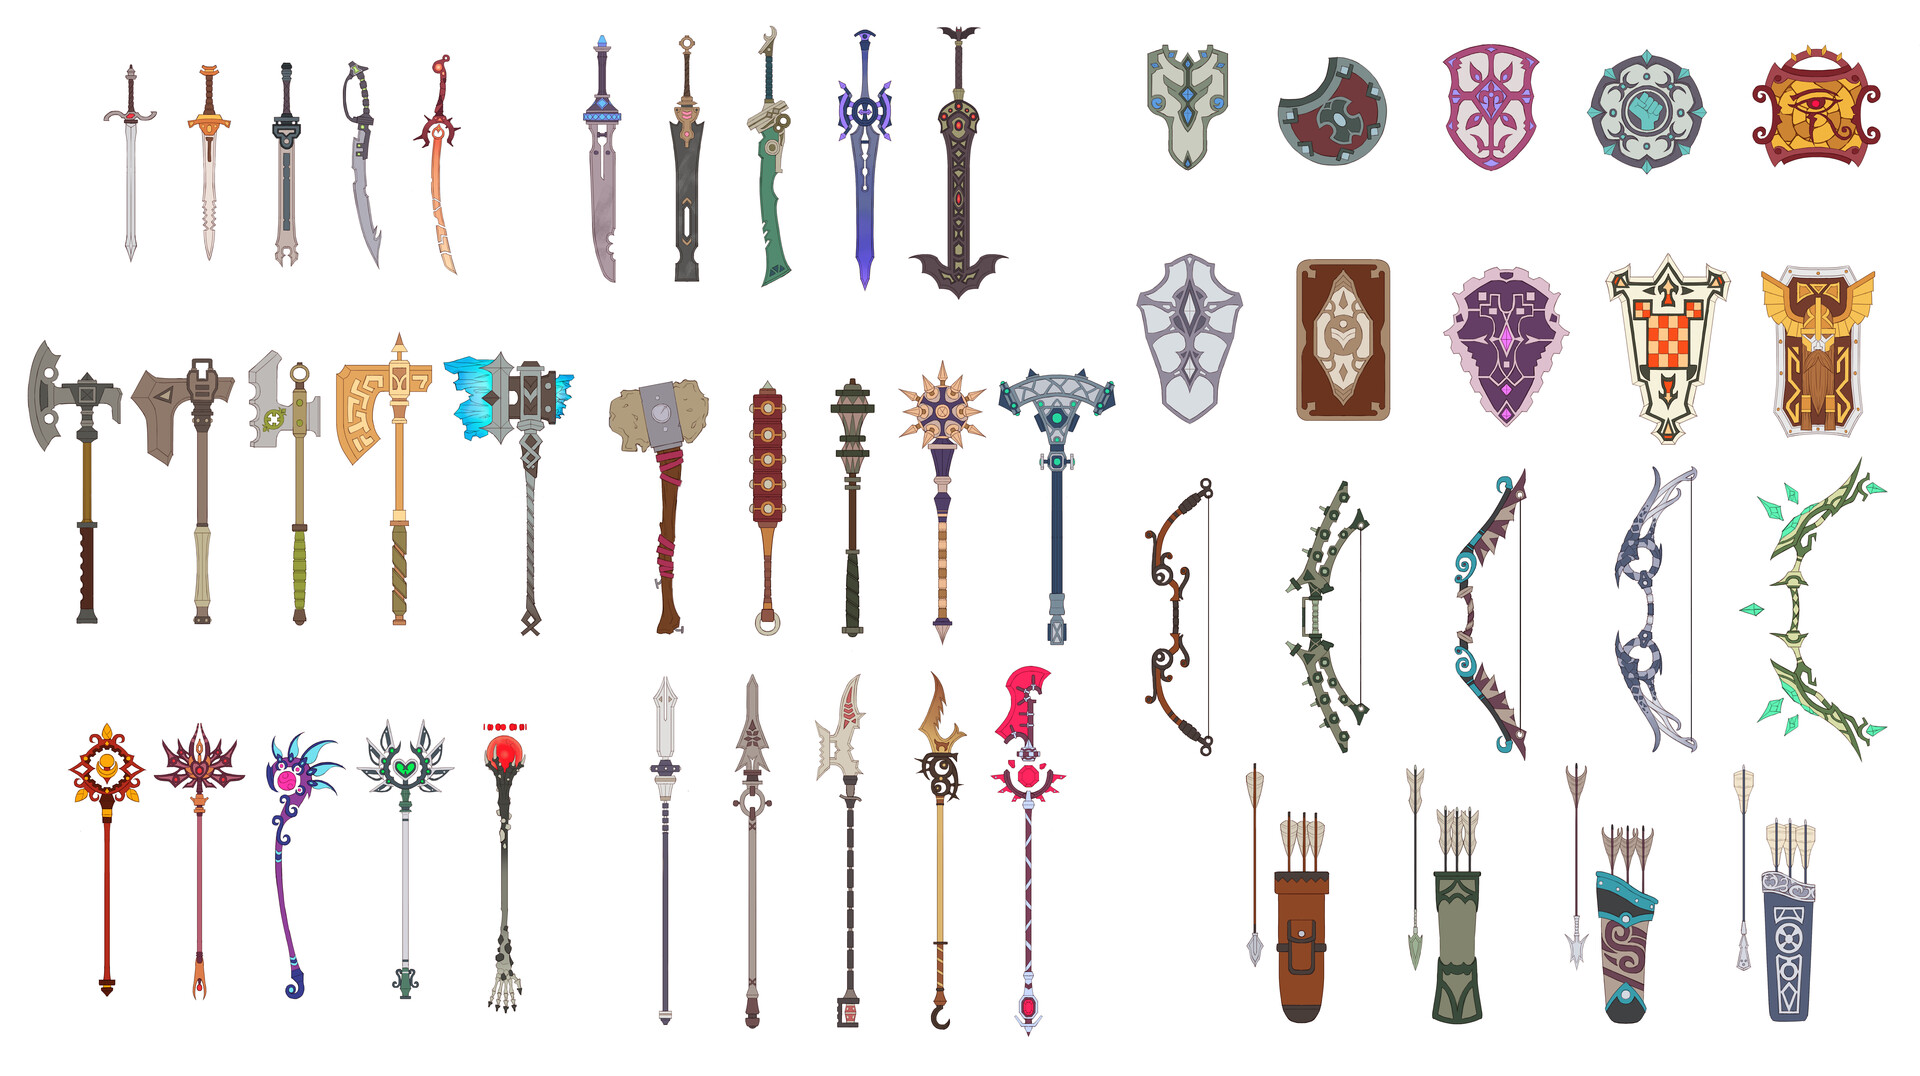 MinWook Kim - Fantasy Weapons and Shields Concept